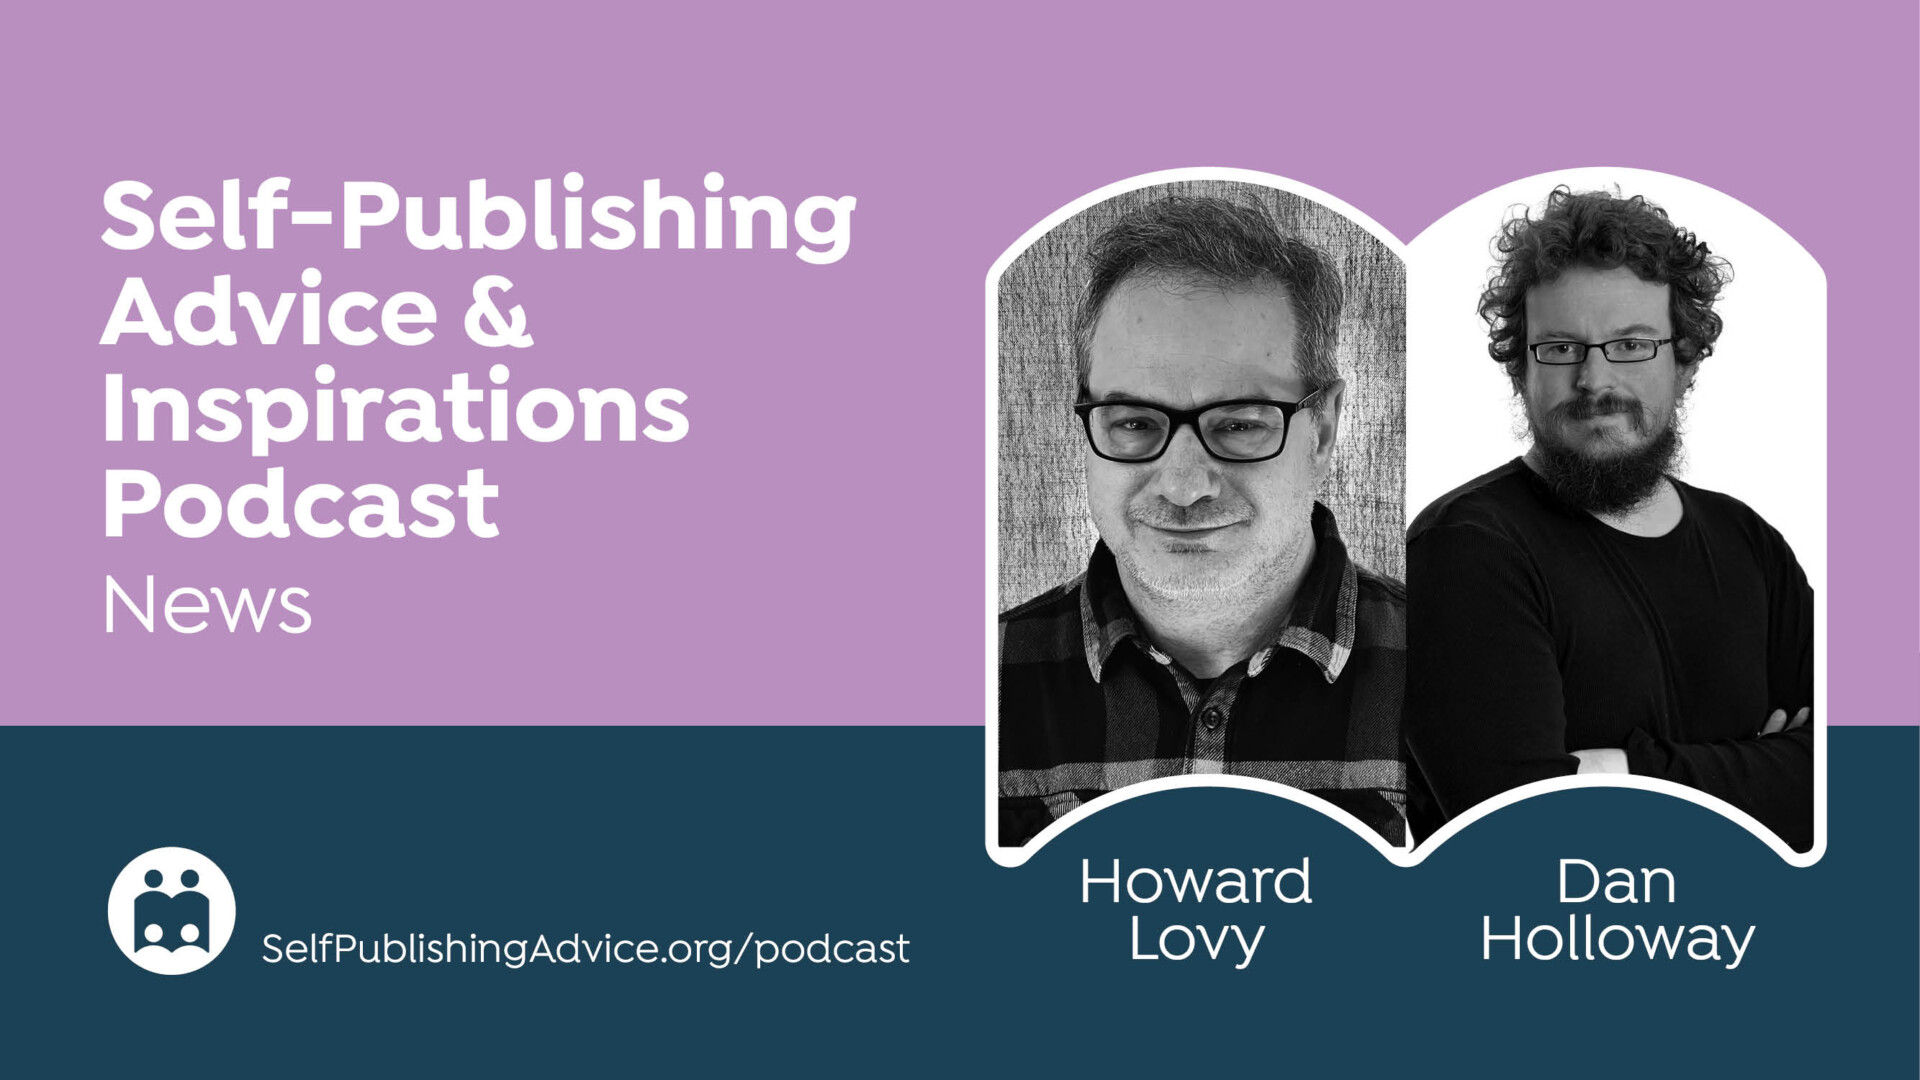 ALLi Income Survey To Reveal How Much Indie Authors Really Make: Self-Publishing News Podcast With Dan Holloway And Howard Lovy